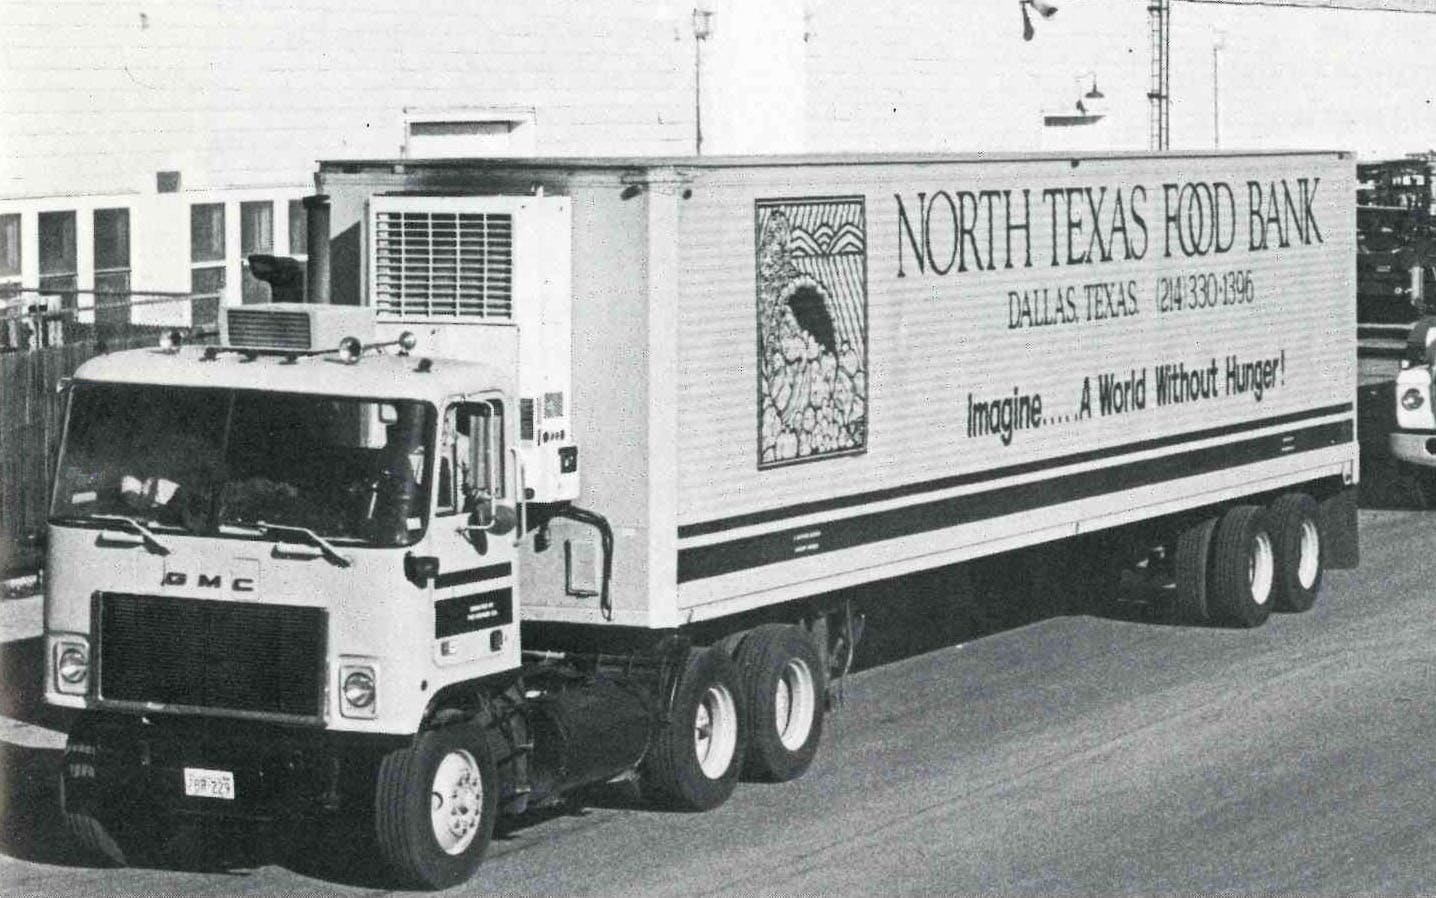 North Texas Food Bank Truck in black and white